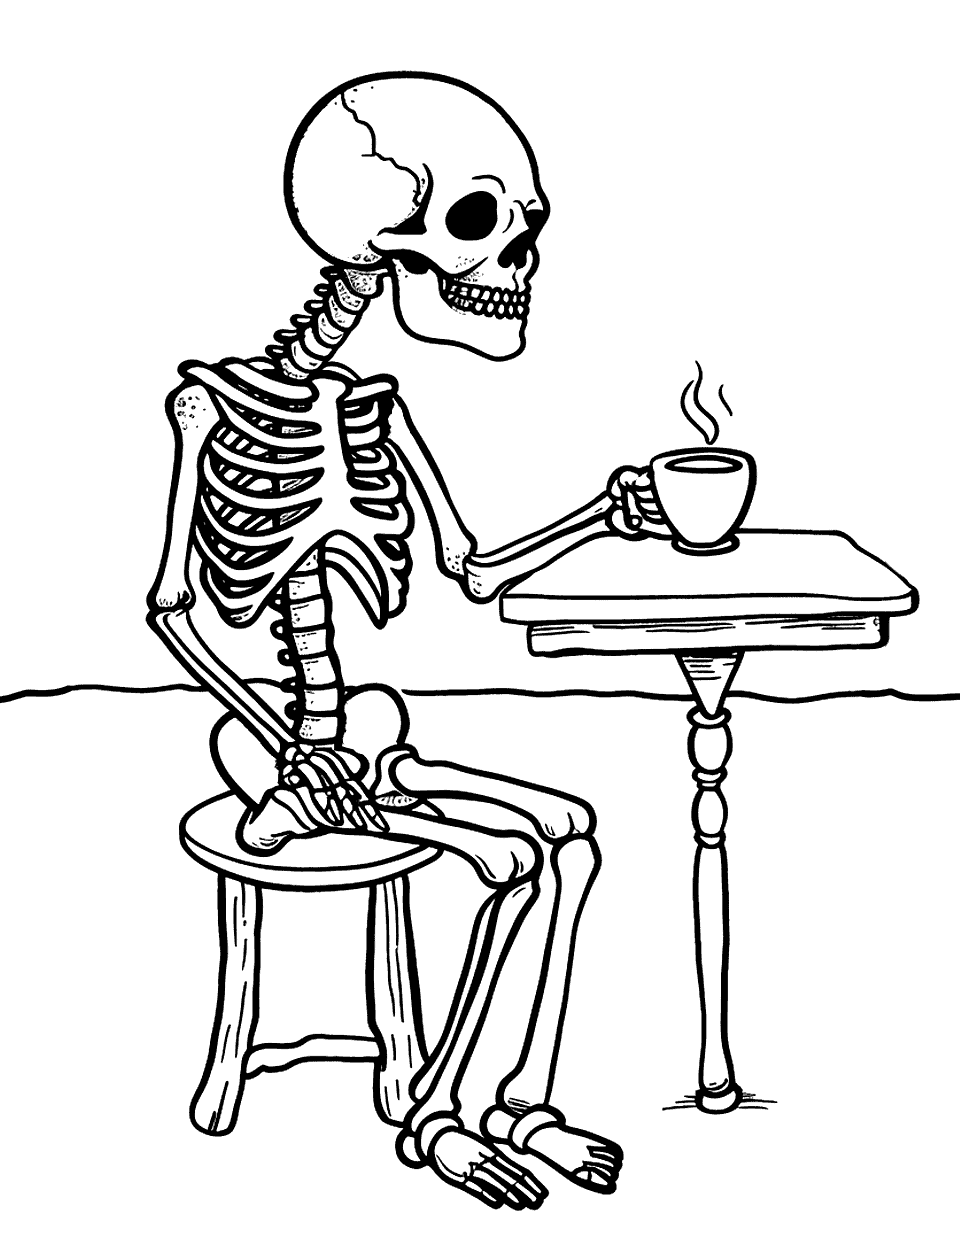 Cute Skeleton Having Tea Coloring Page - A cute skeleton sitting at a table, enjoying a cup of tea.